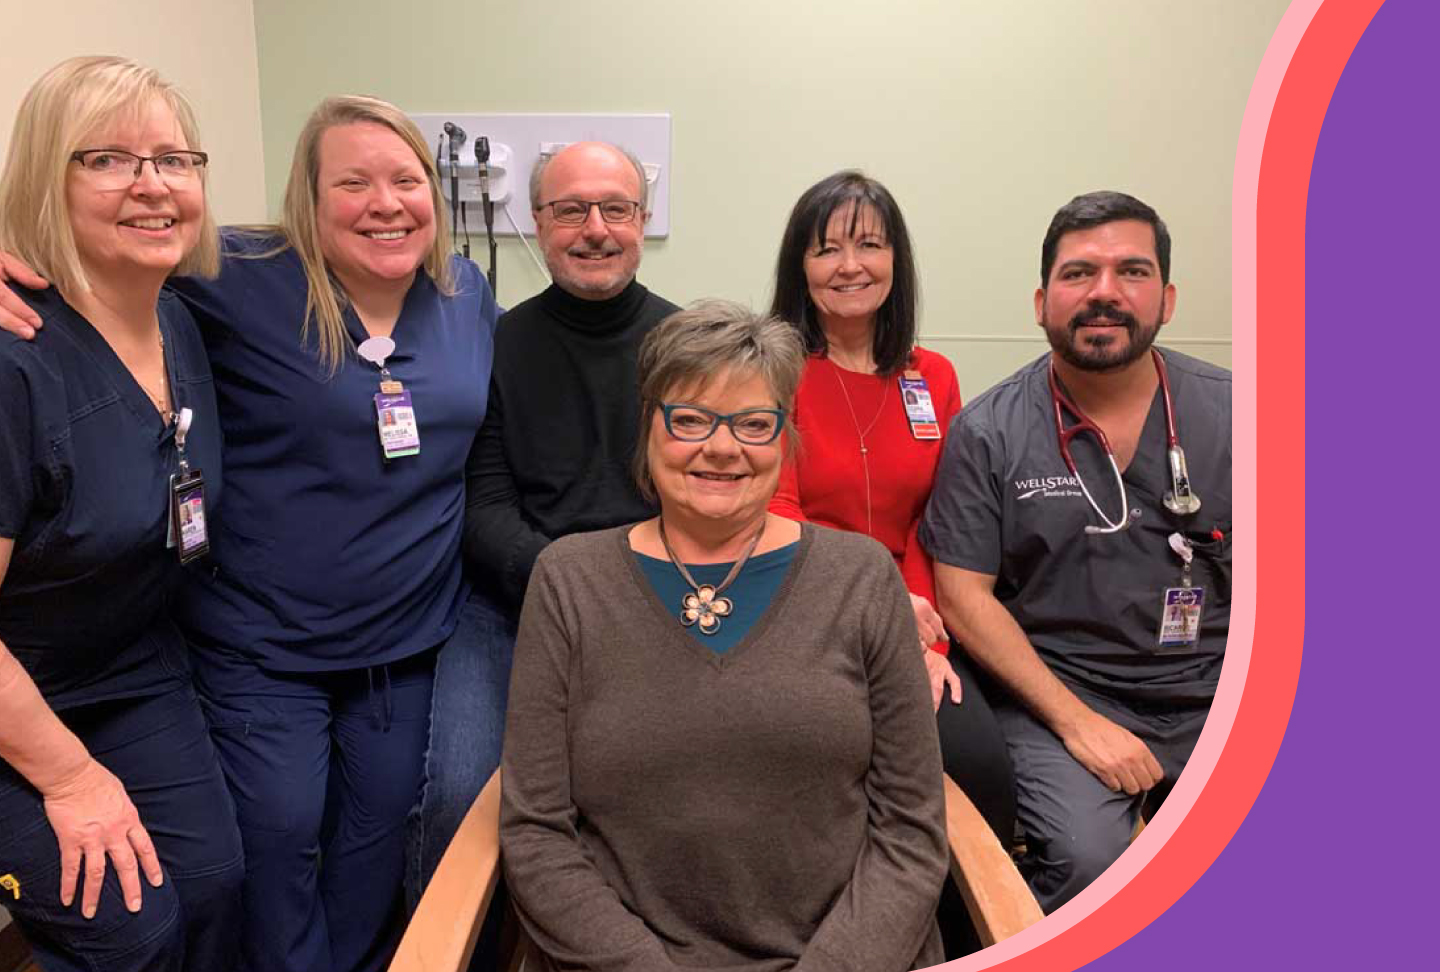 Heidi Bohlmann (front center) stands with her husband and care team at a medical office.